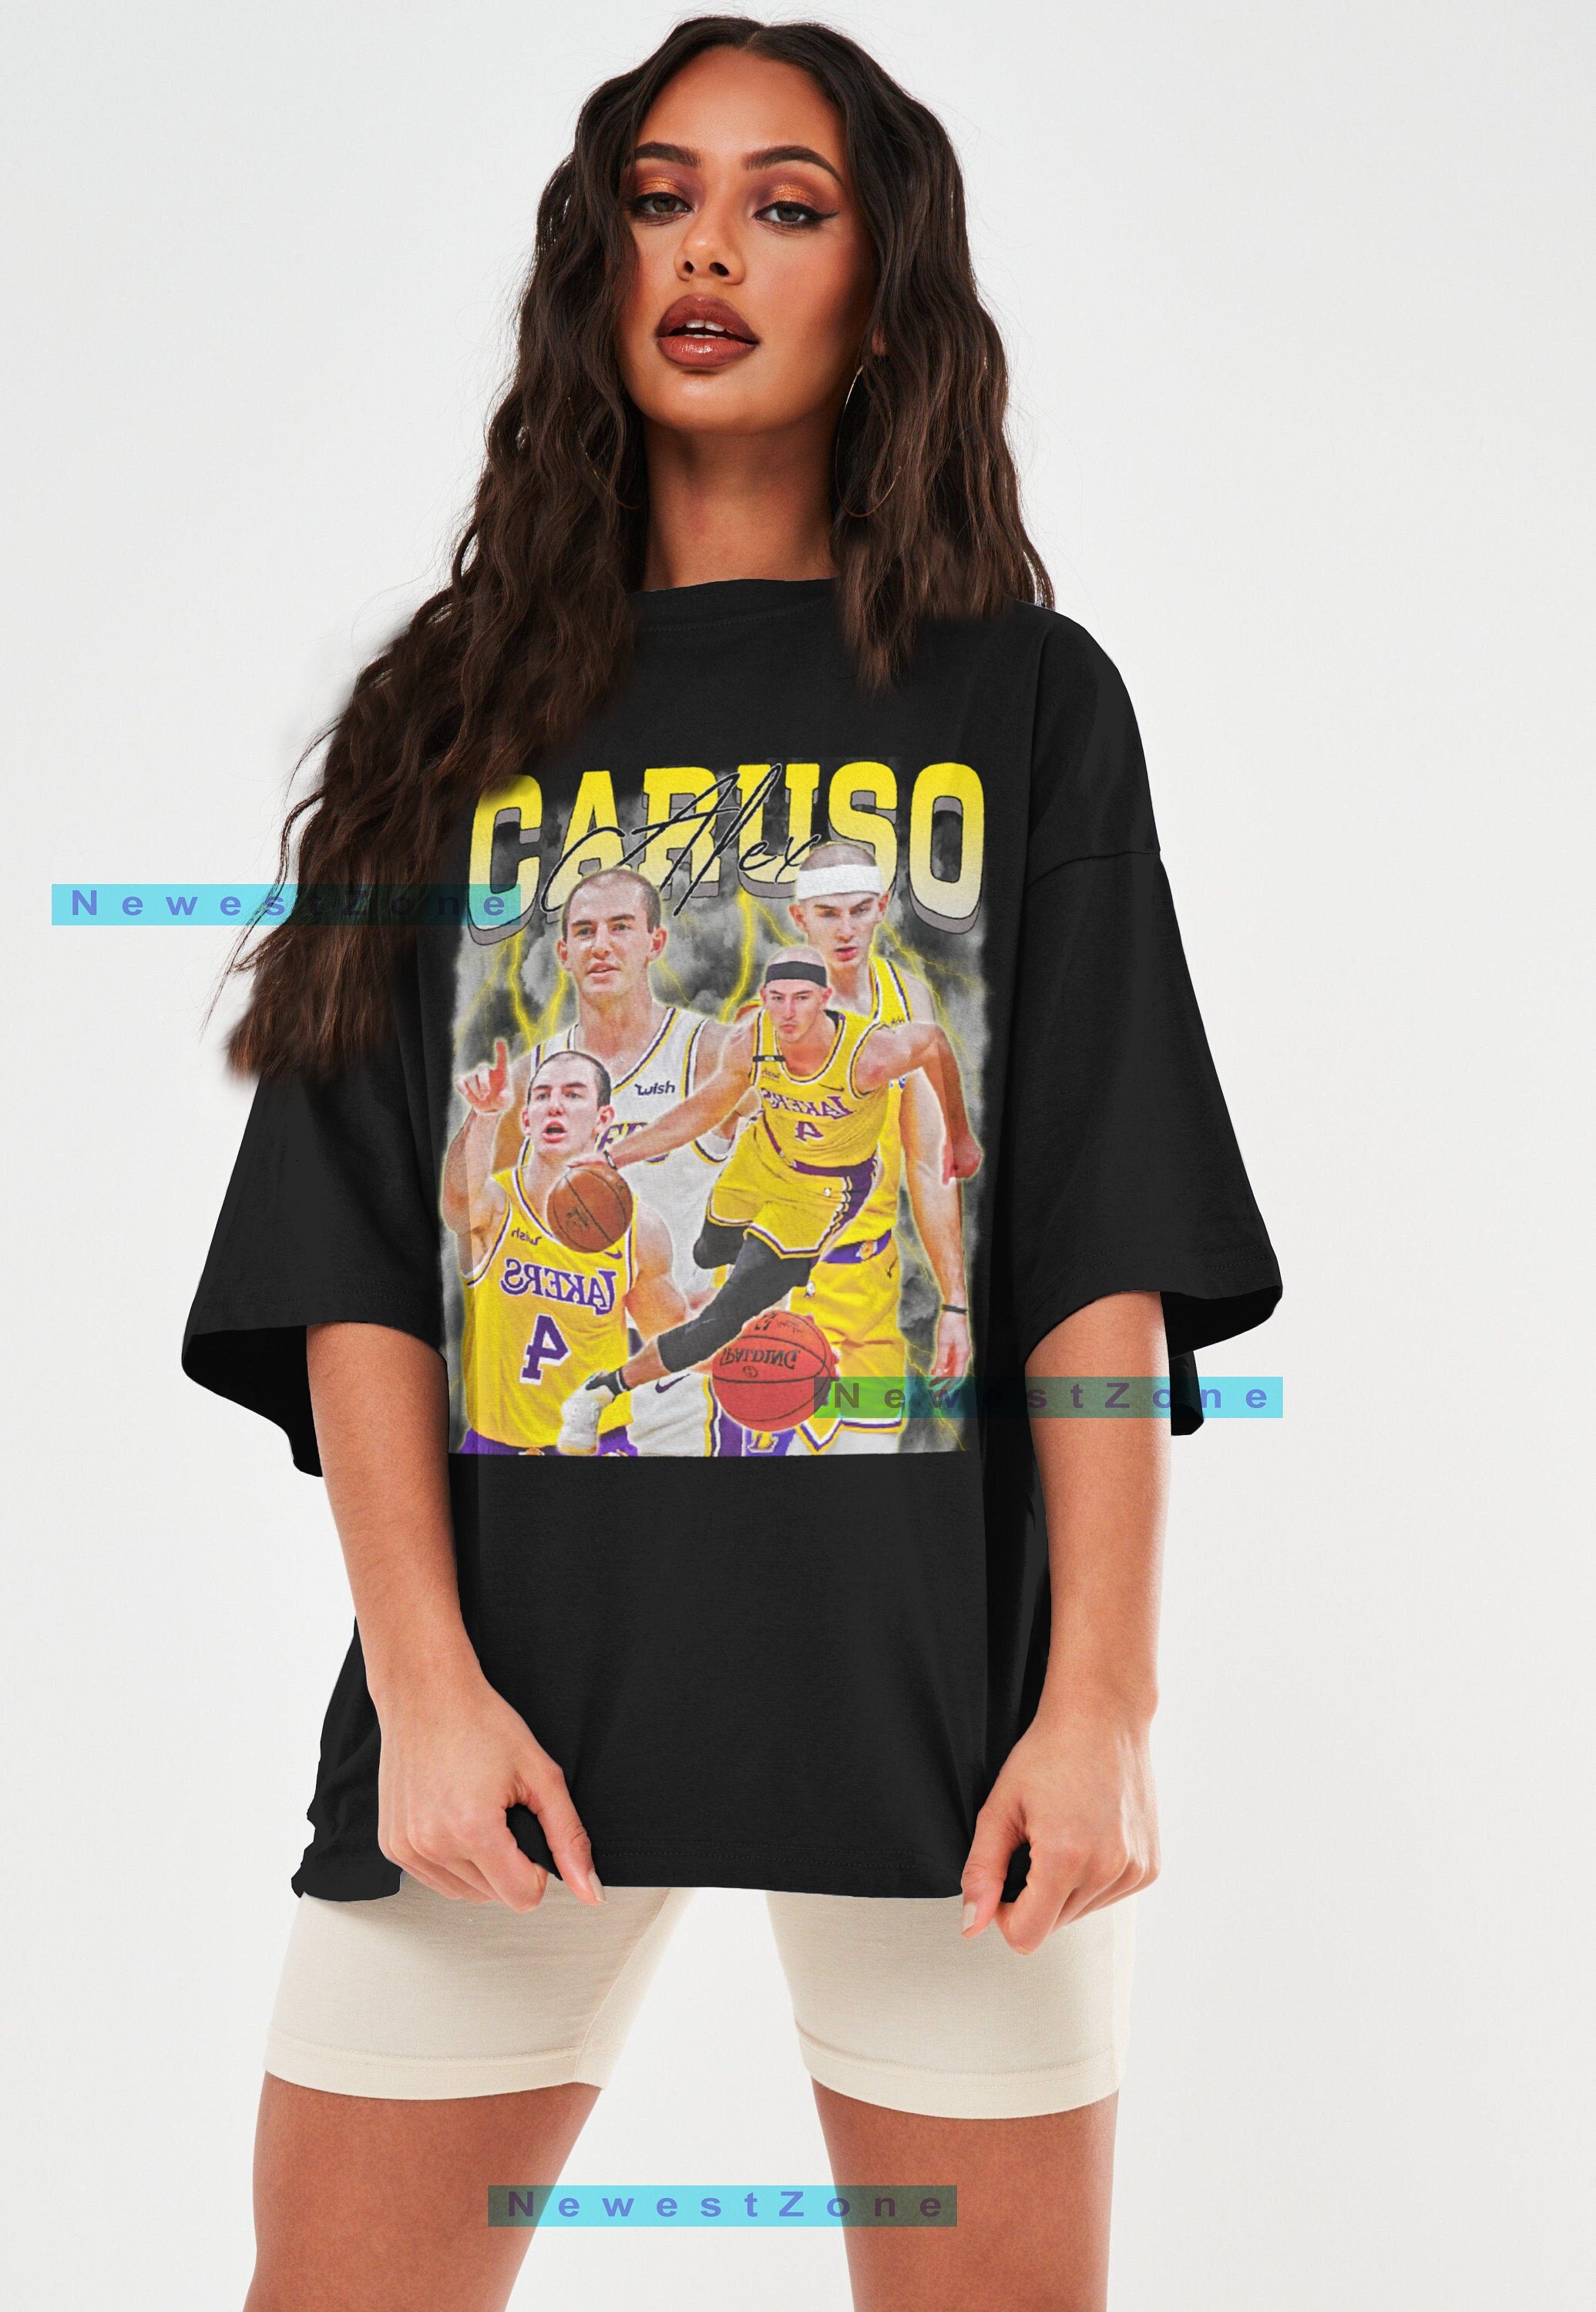 Vintage Style 2009 Lakers Championship T Shirt - Trends Bedding